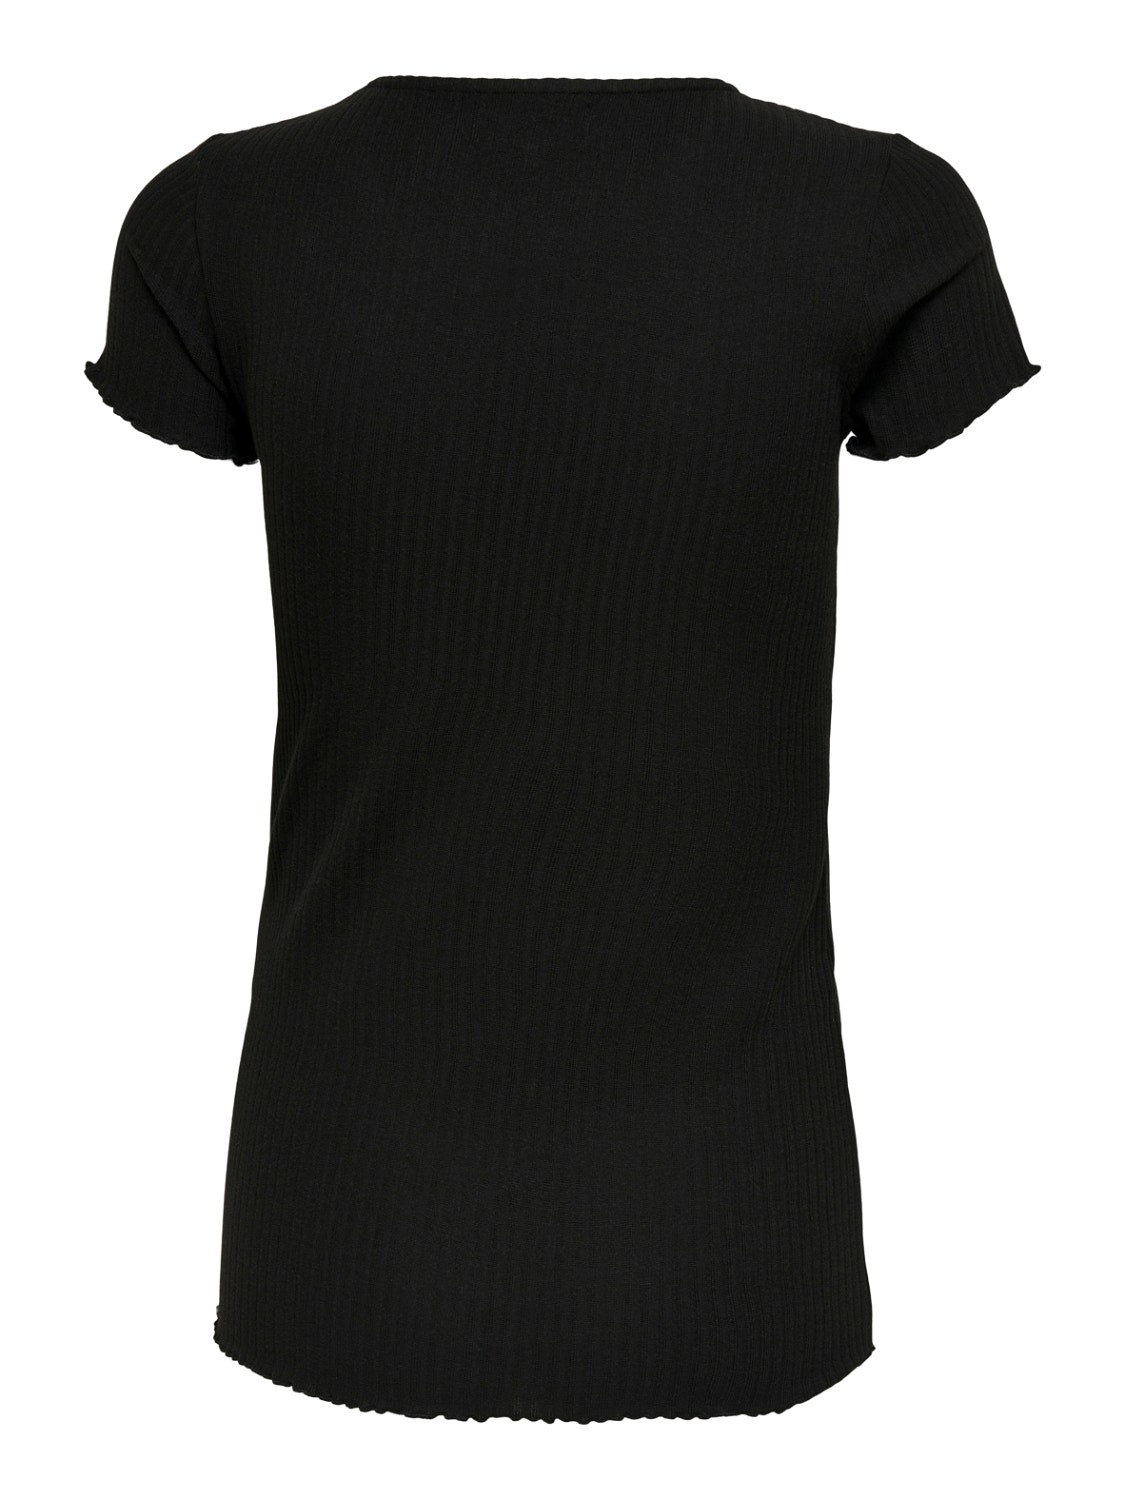 ONLY Mama short sleeved Top -Black - 15242107